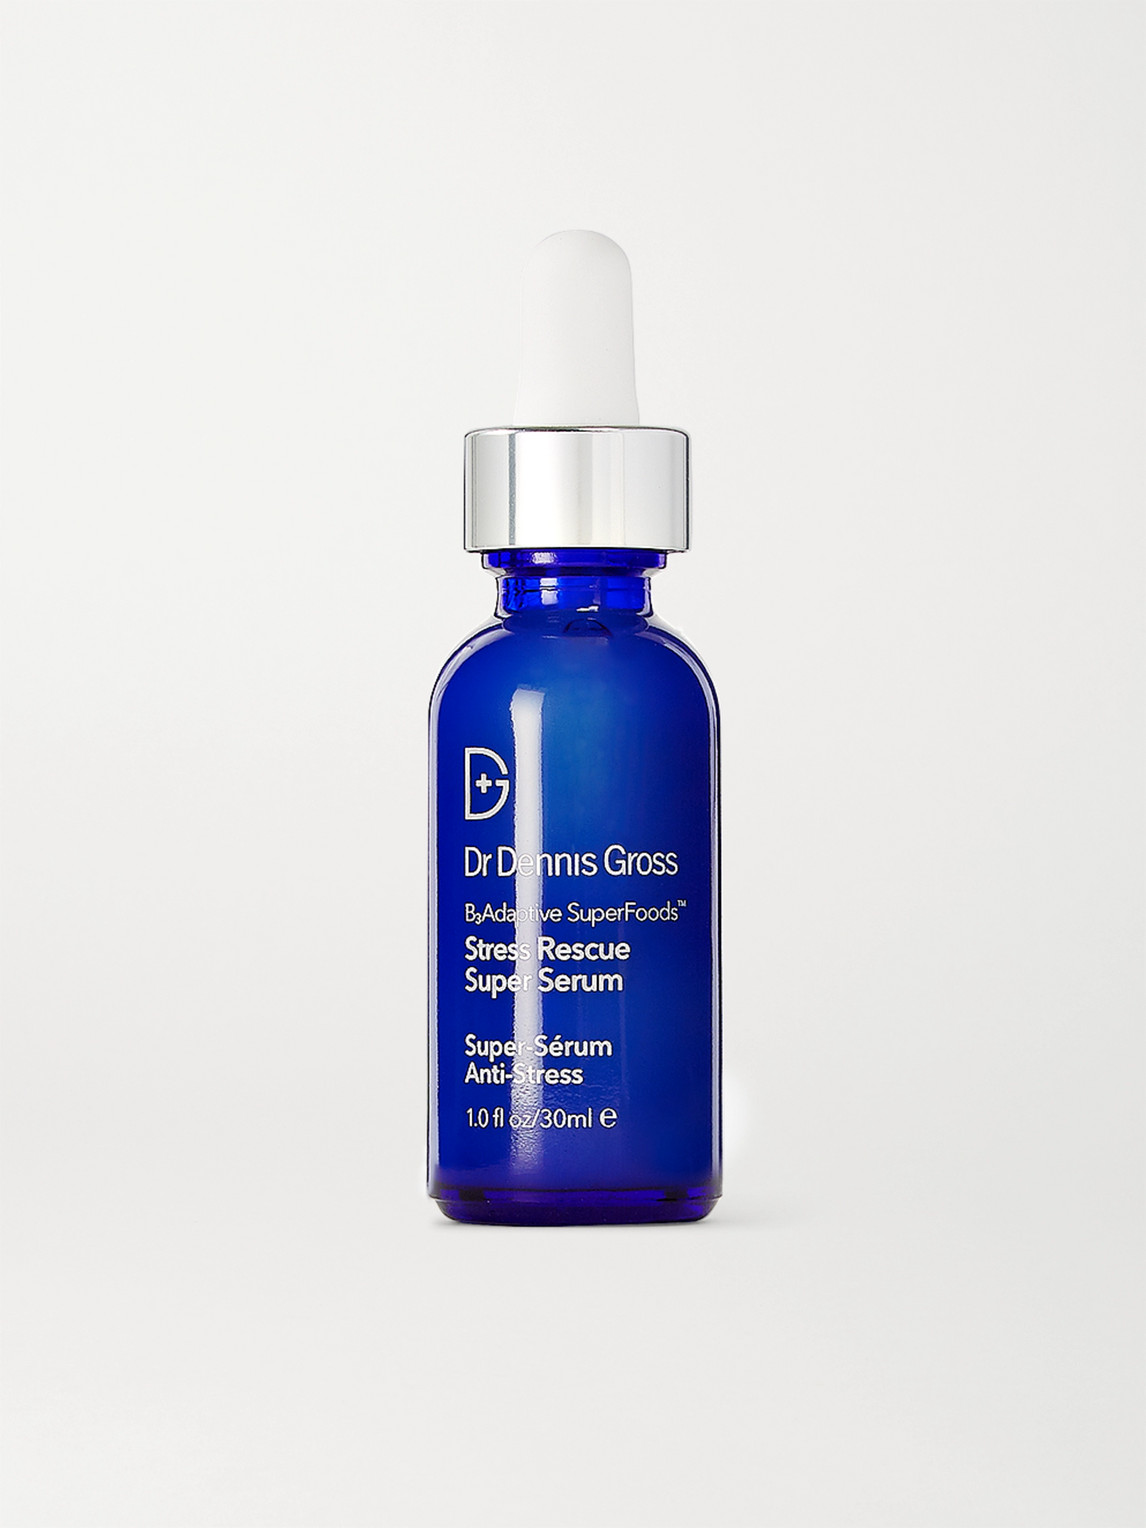 Dr. Dennis Gross Skincare B³adaptive Superfoods Stress Rescue Super Serum, 30ml - One Size In Colorless